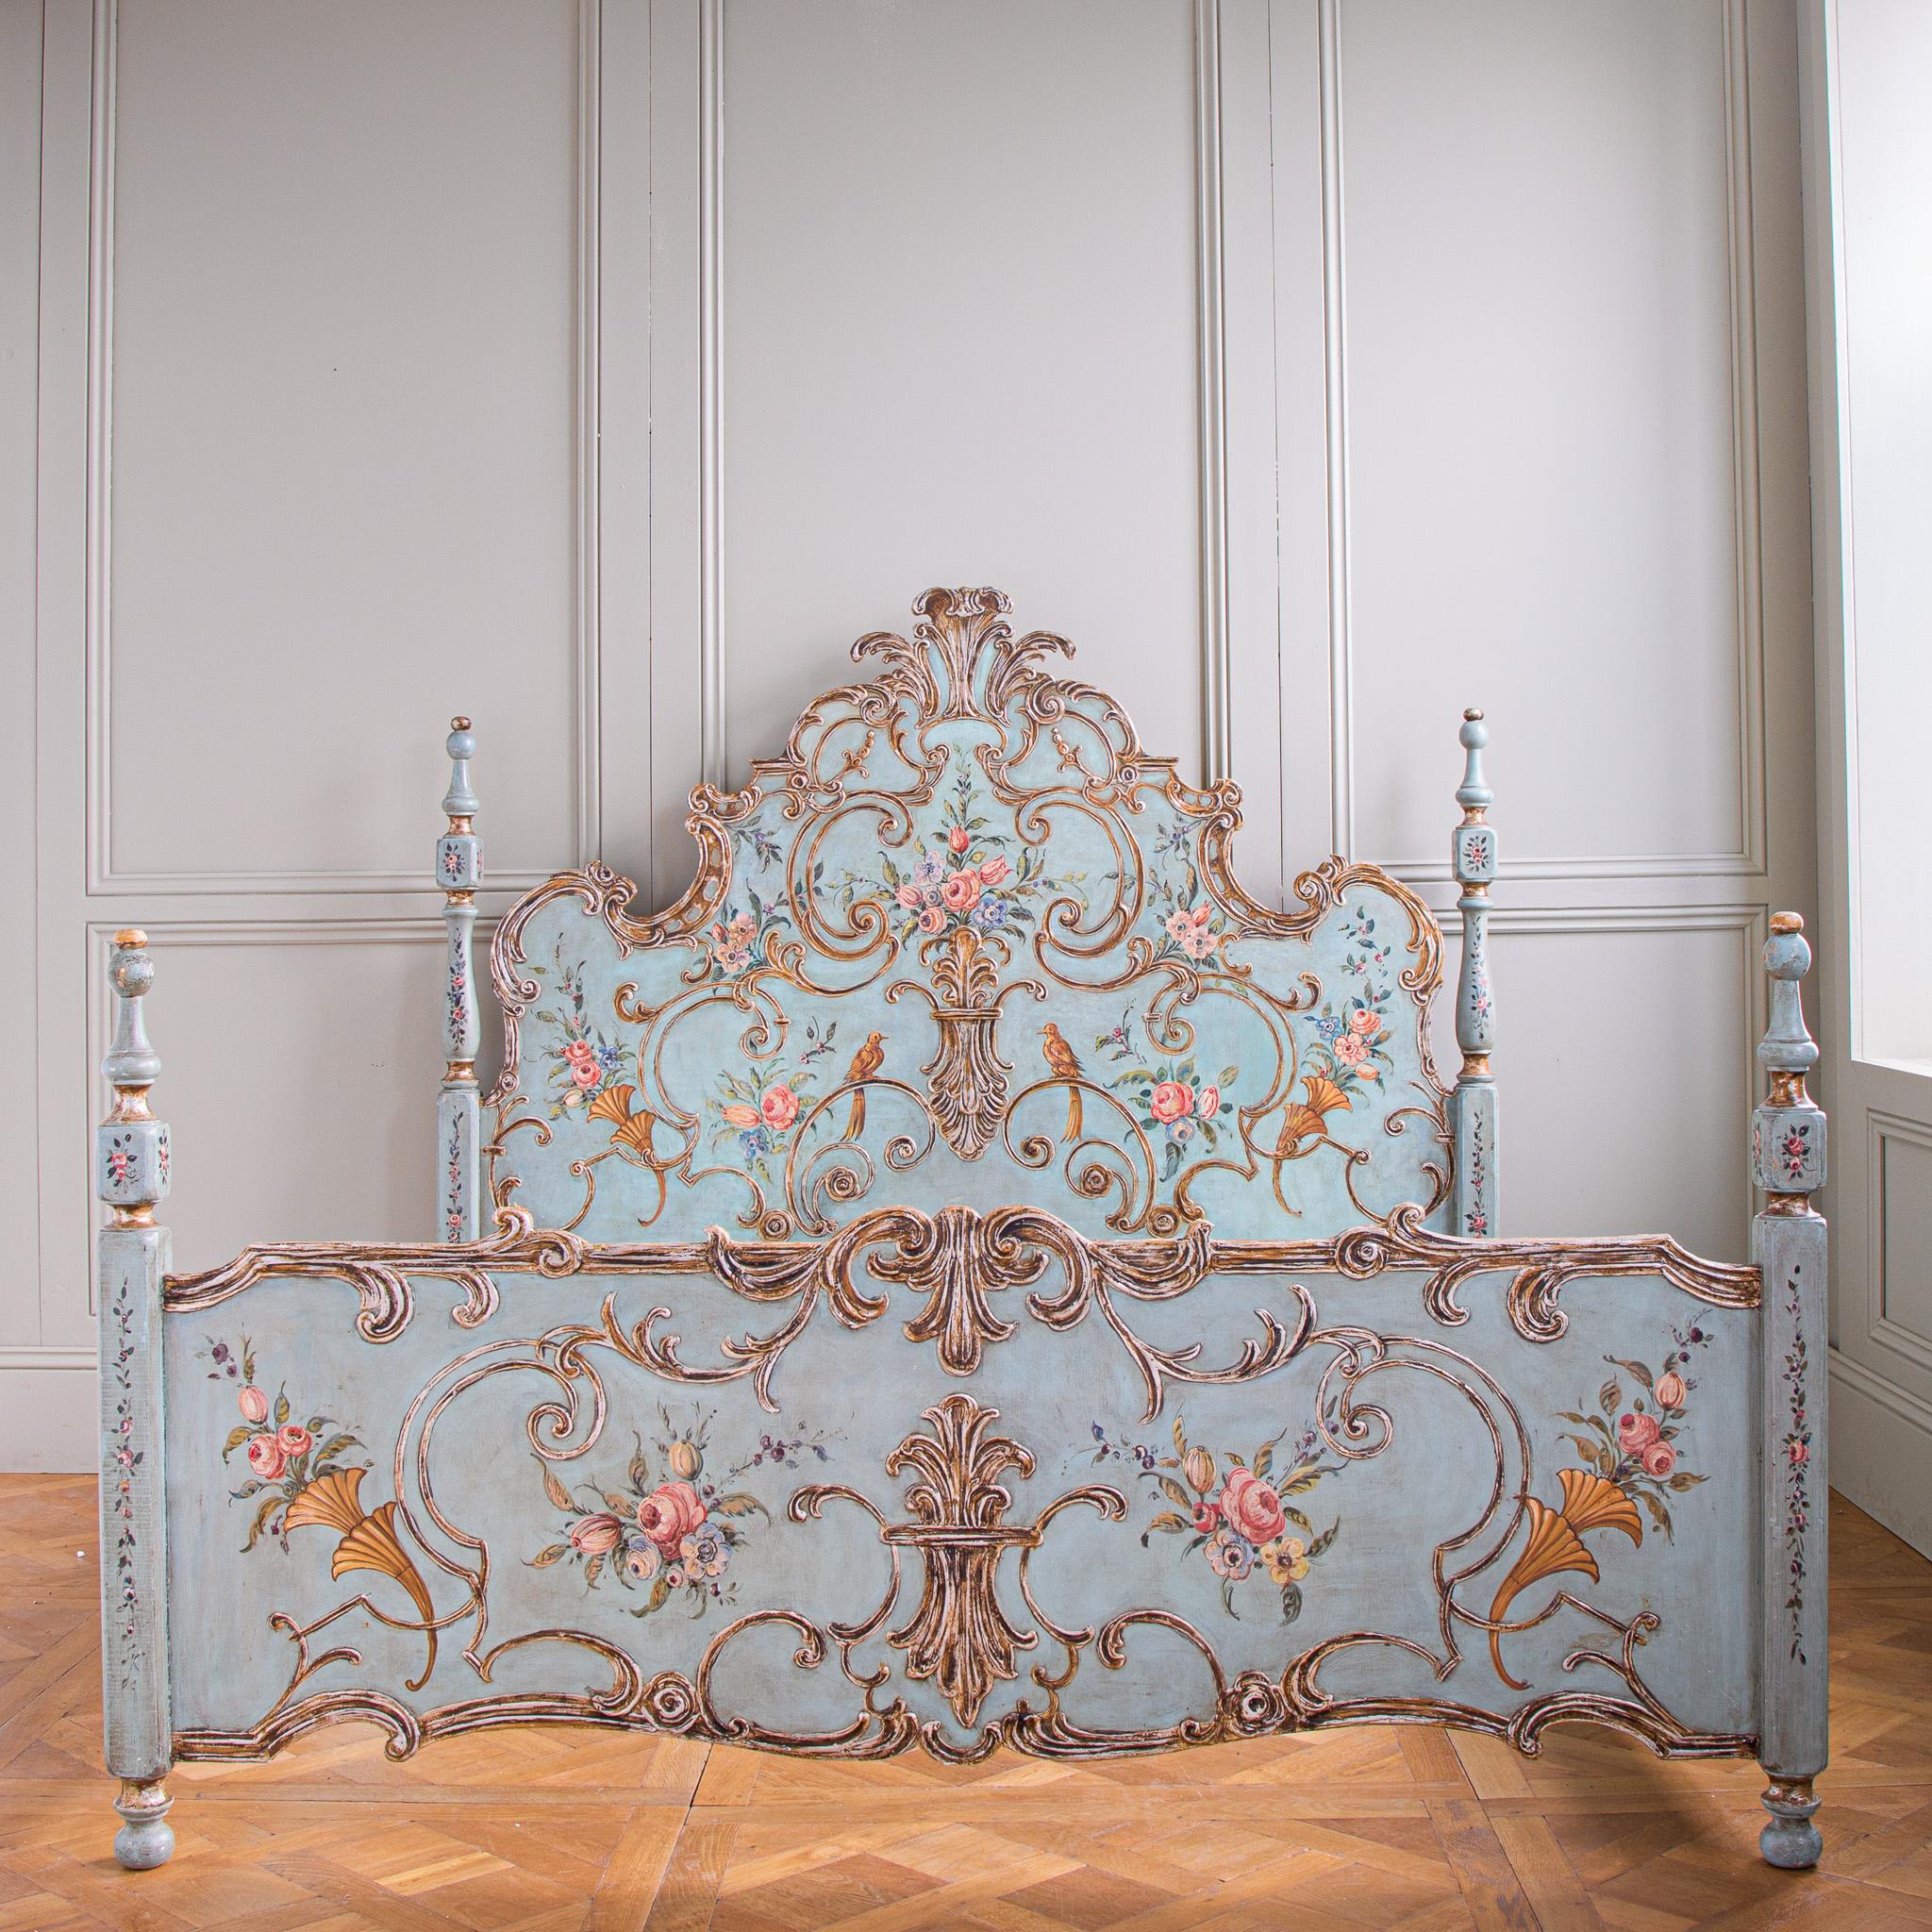 Sourced in Italy, this bed is a one off, Venetian style bed frame, circa 1940's. It is a rare size find for its age as it it takes a large mattress size of 76' x 80' ( US King Size /193 x 203cm's).
The bed features relief carving of rococo inspired